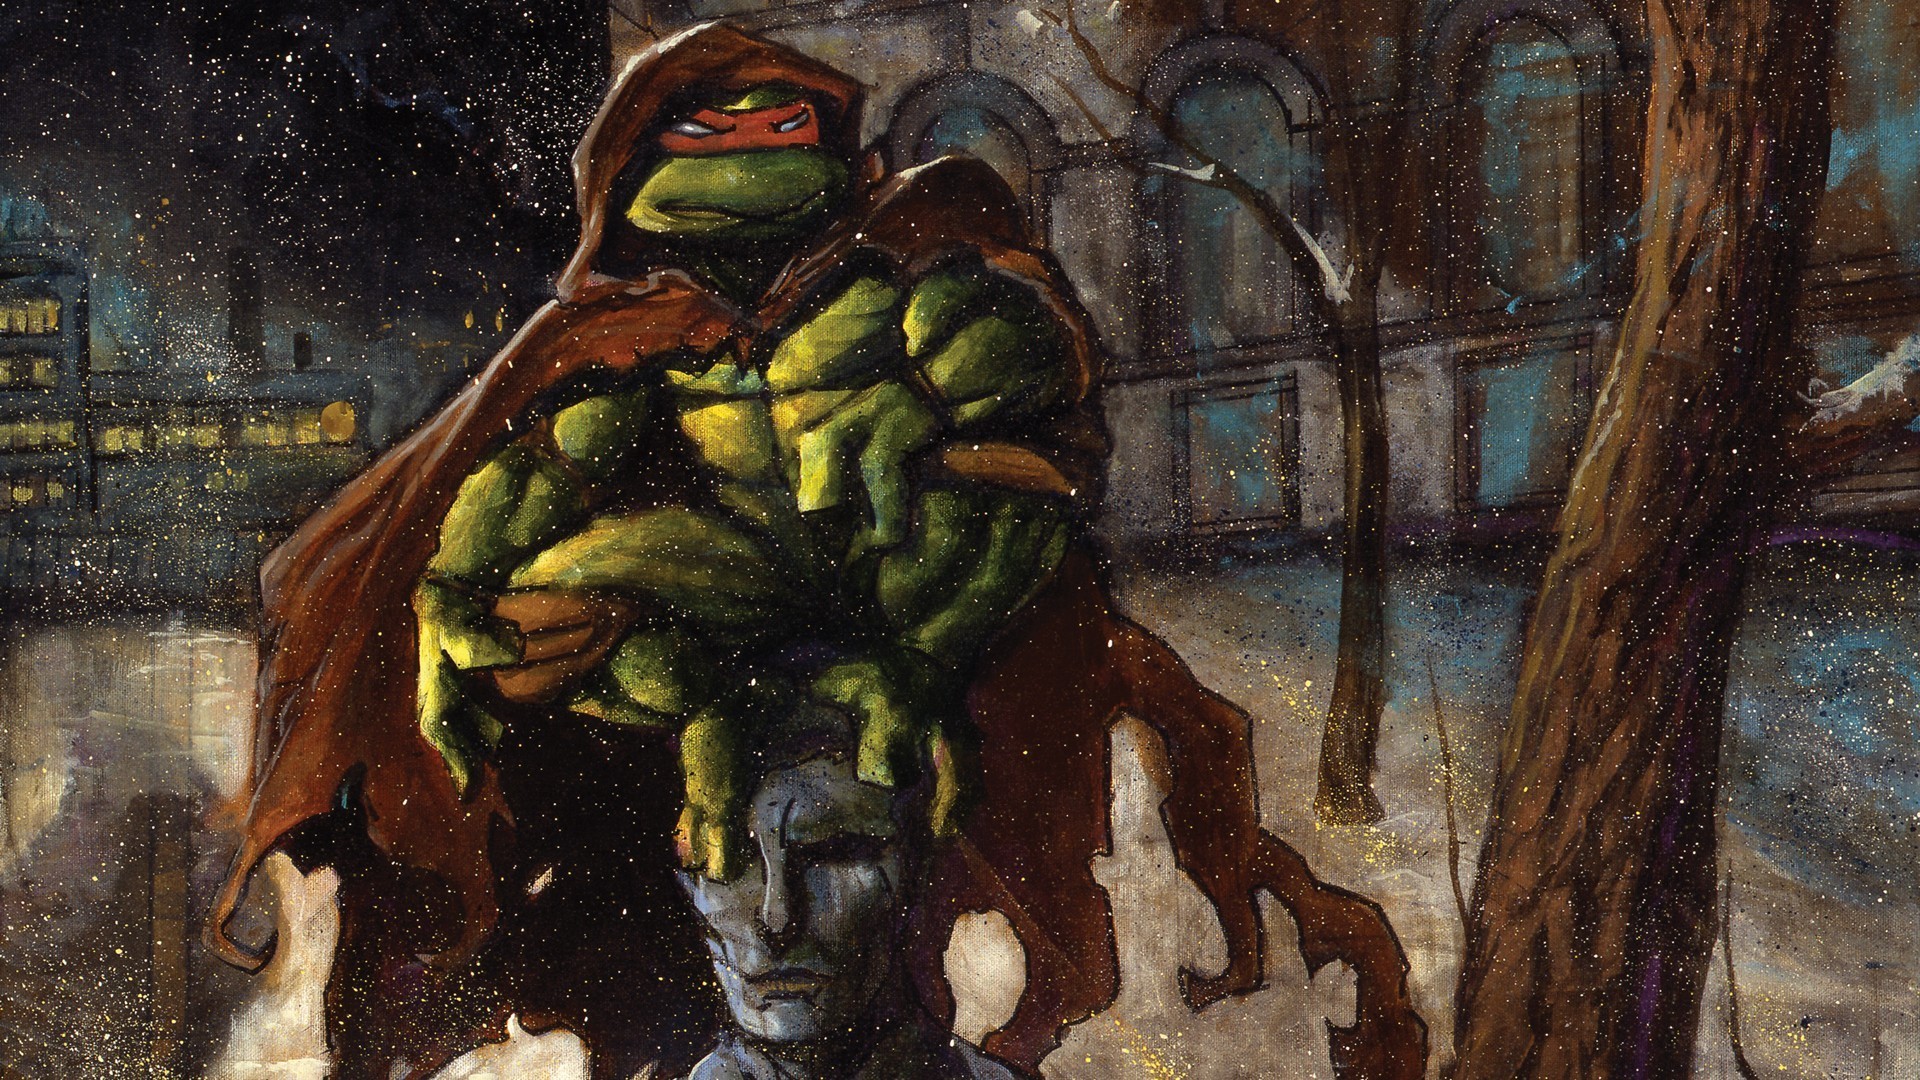 1920x1080 10 Best images about TMNT on Pinterest | Behance, Cartoon and Turtles